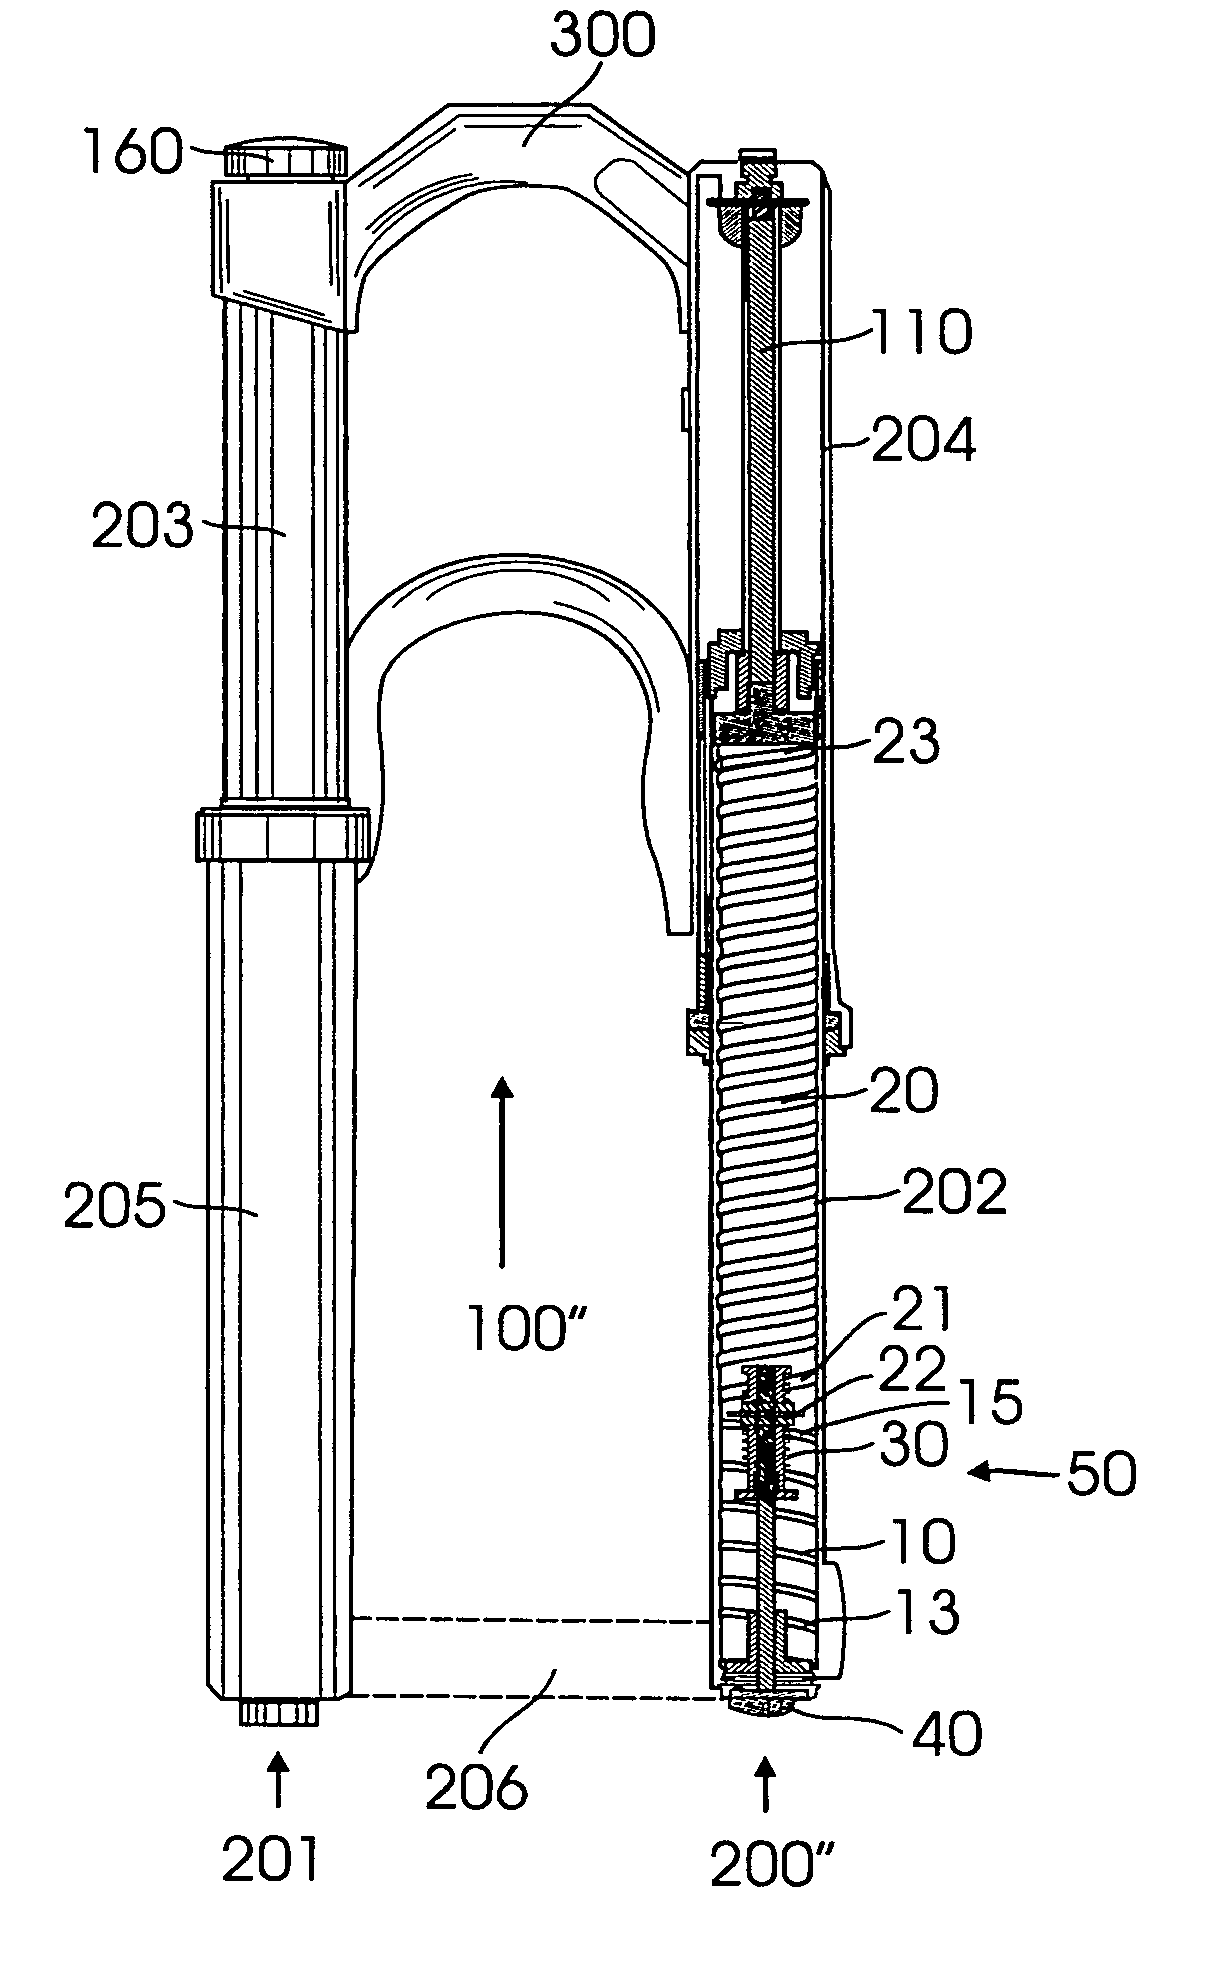 Adjustable and progressive coil spring system for two wheeled vehicles